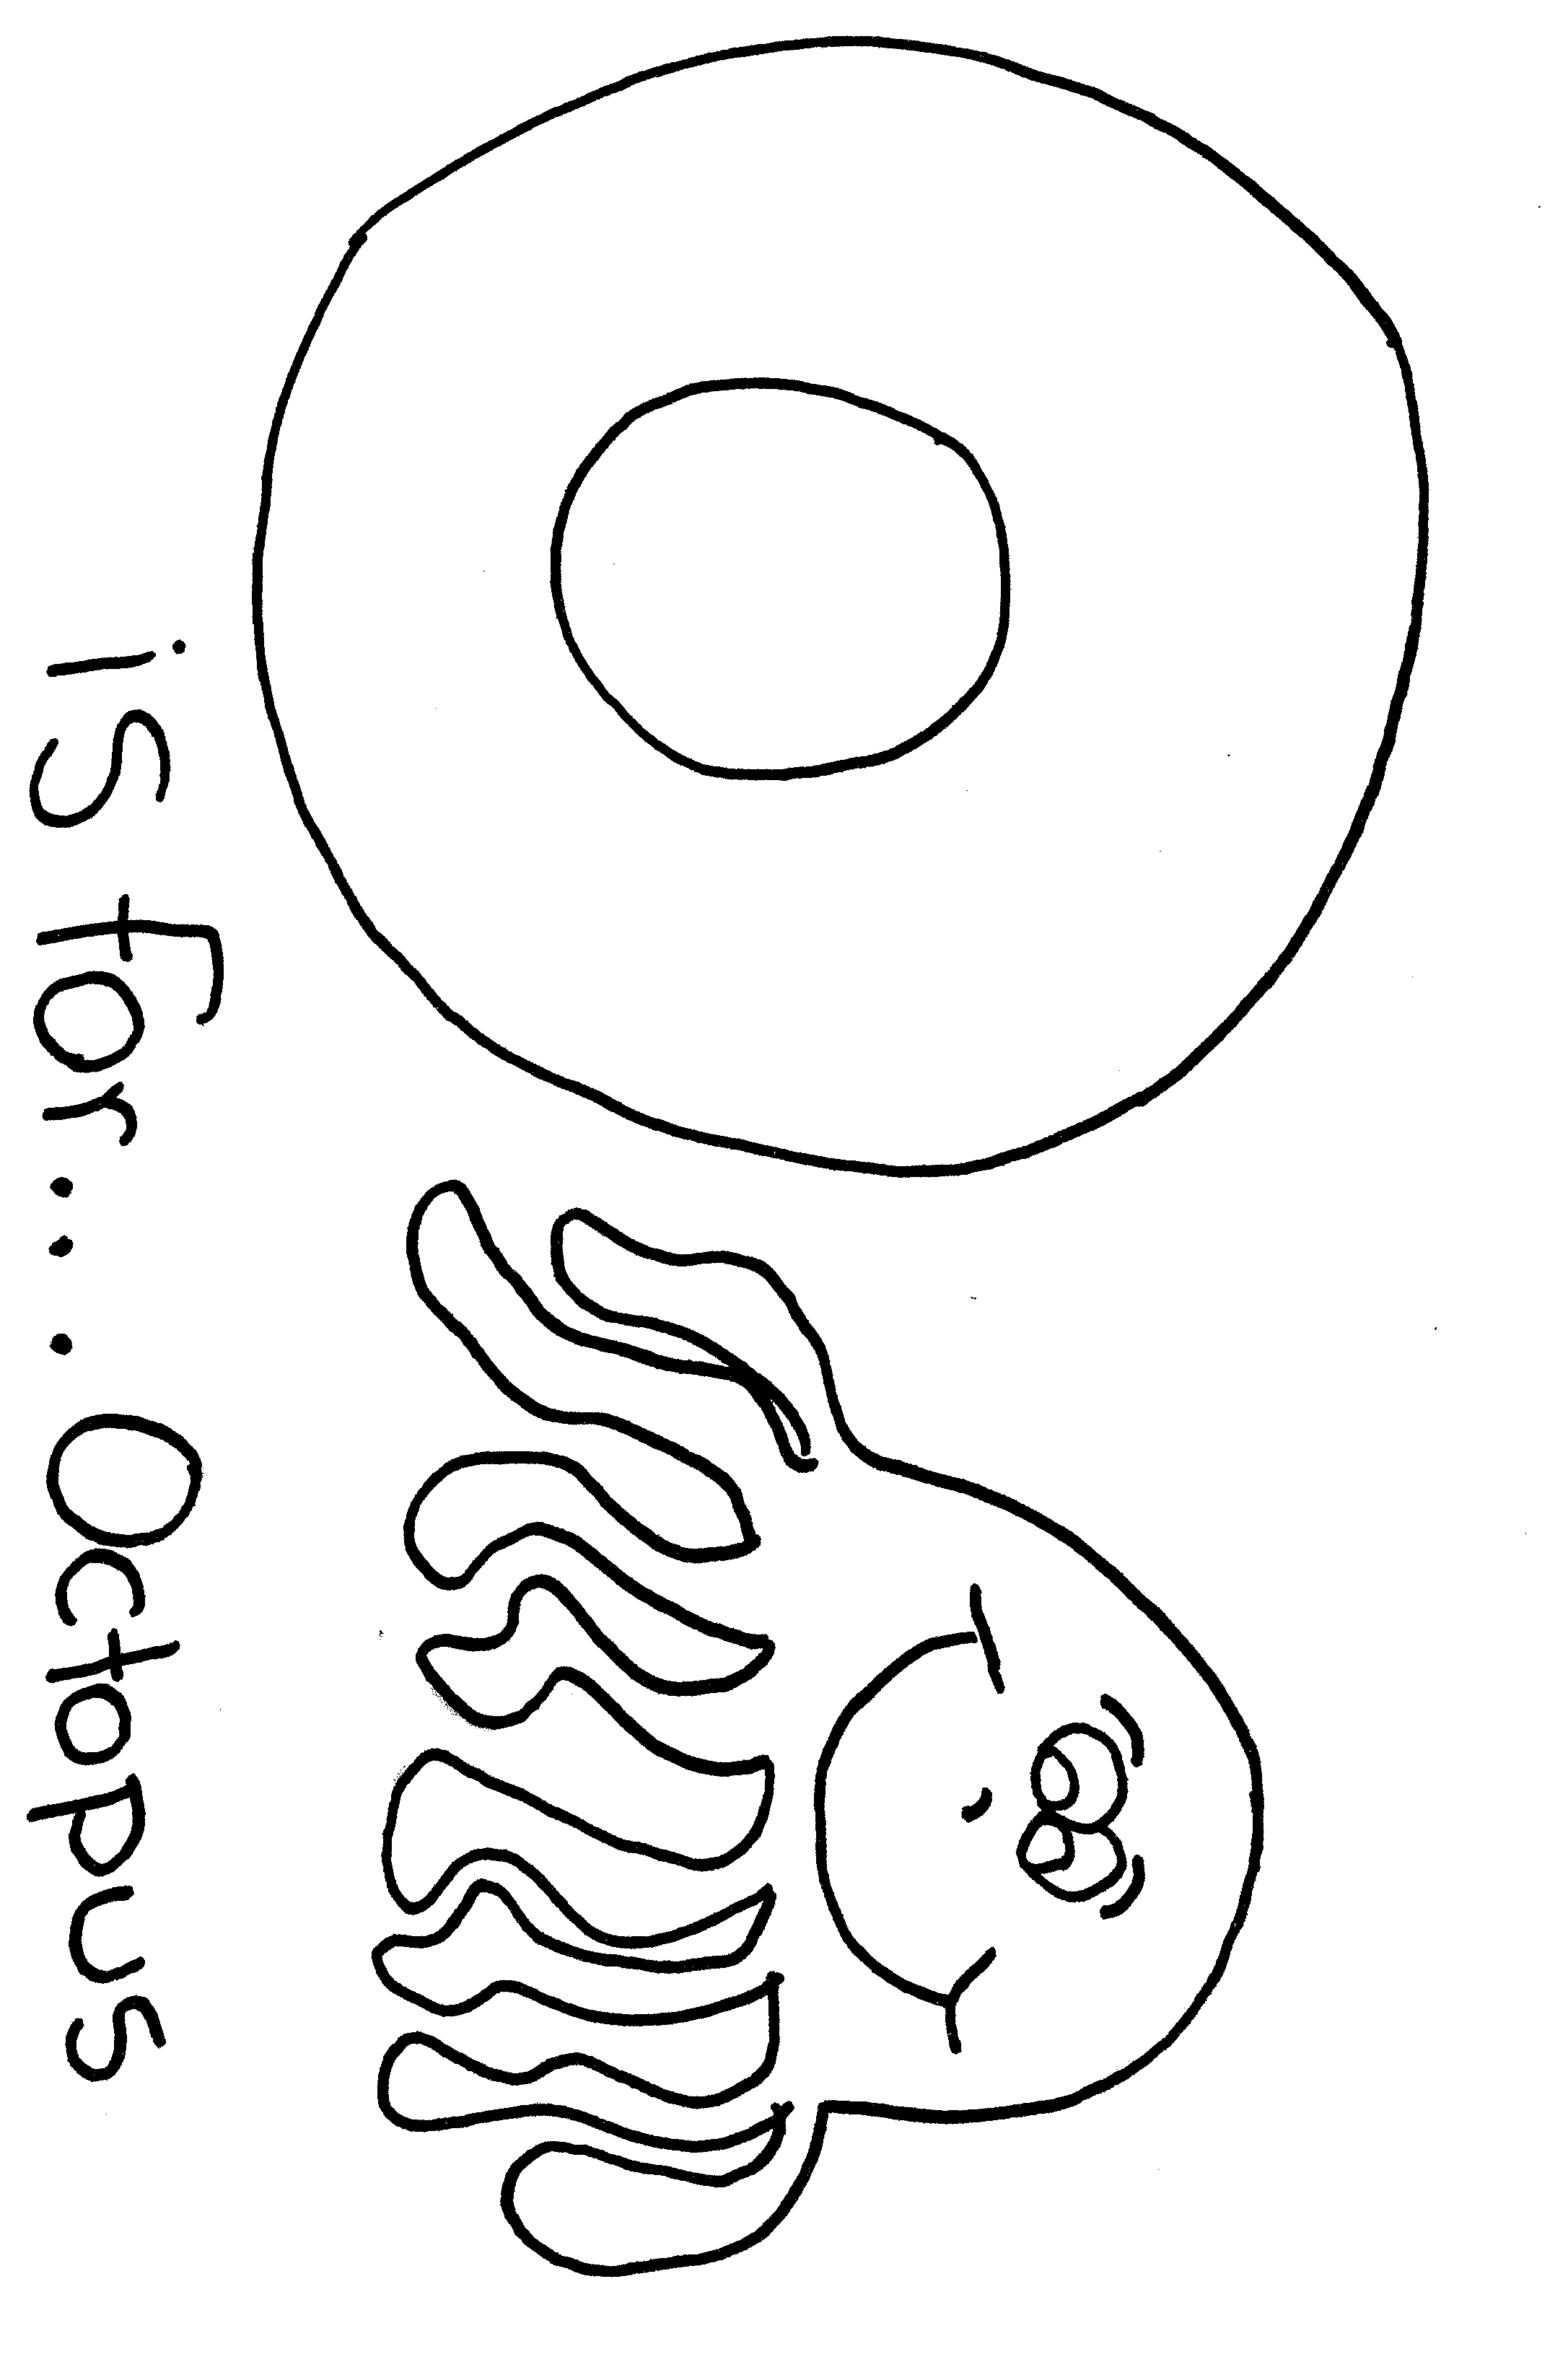 free family activity - alphabet coloring page featuring the letter o